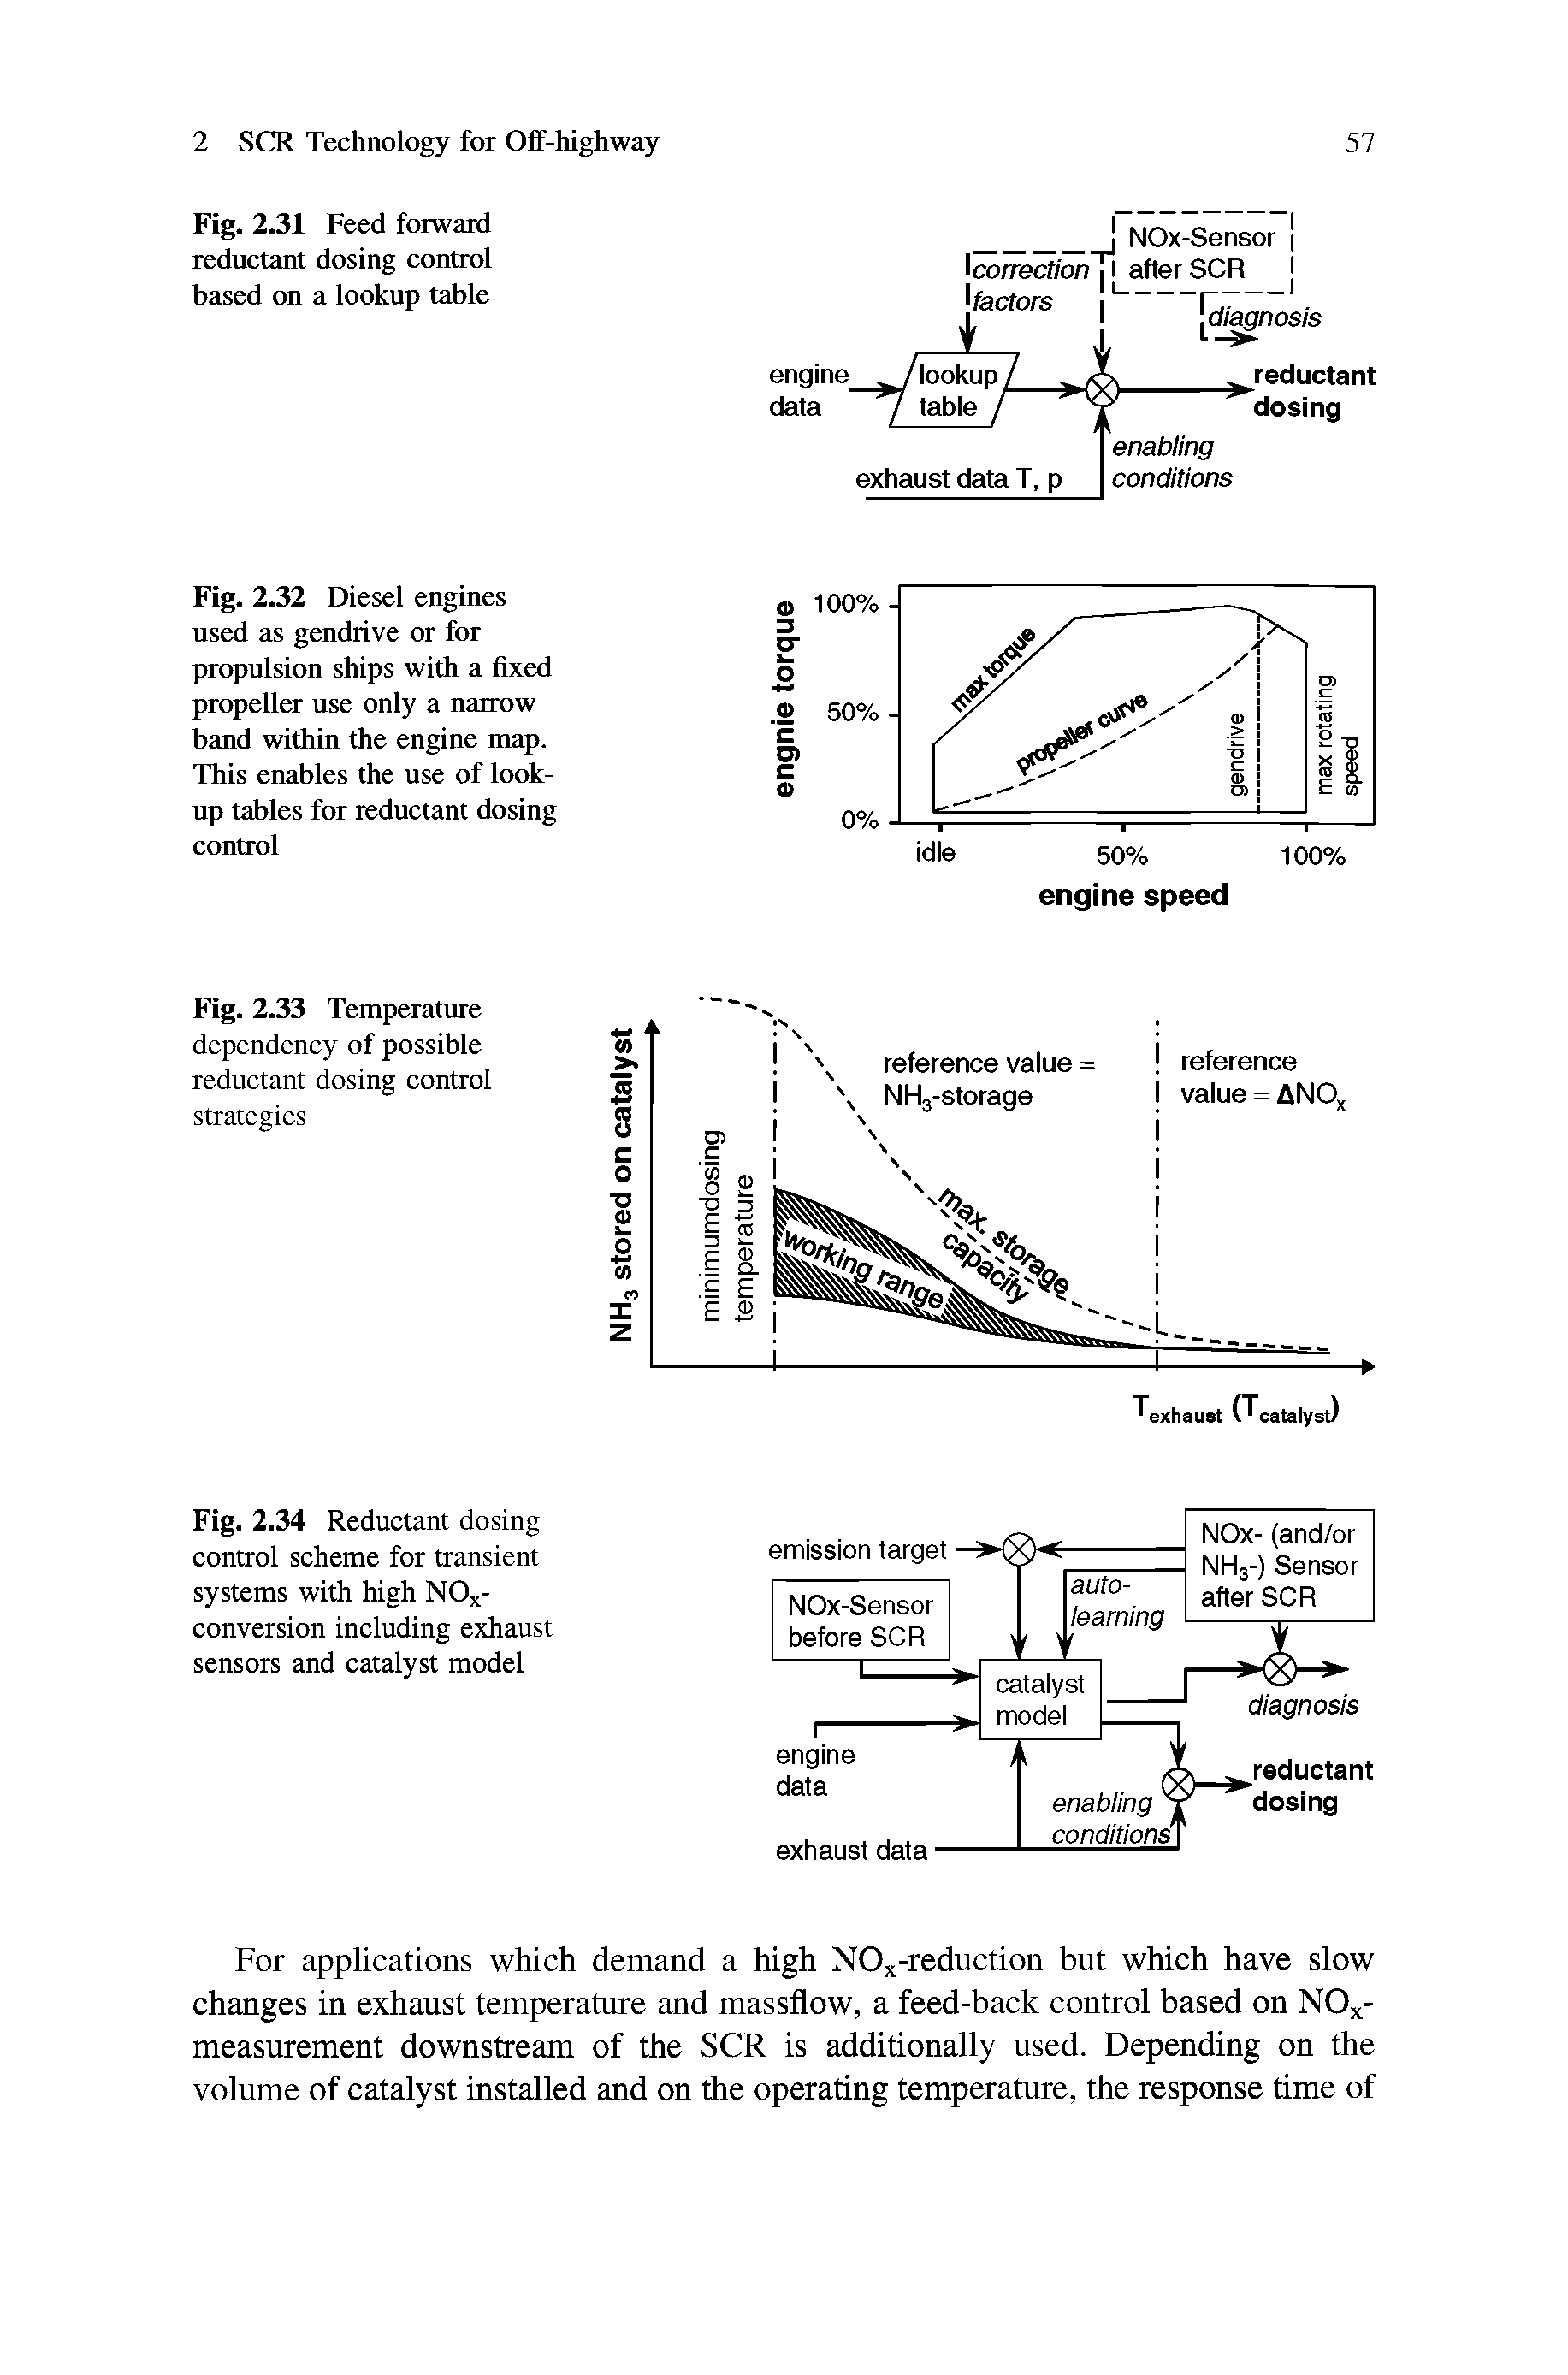 Fig. 2.32 Diesel engines used as gendrive or for propulsion ships with a fixed propeller use only a narrow band within the engine map. This enables the use of lookup tables for reductant dosing control...